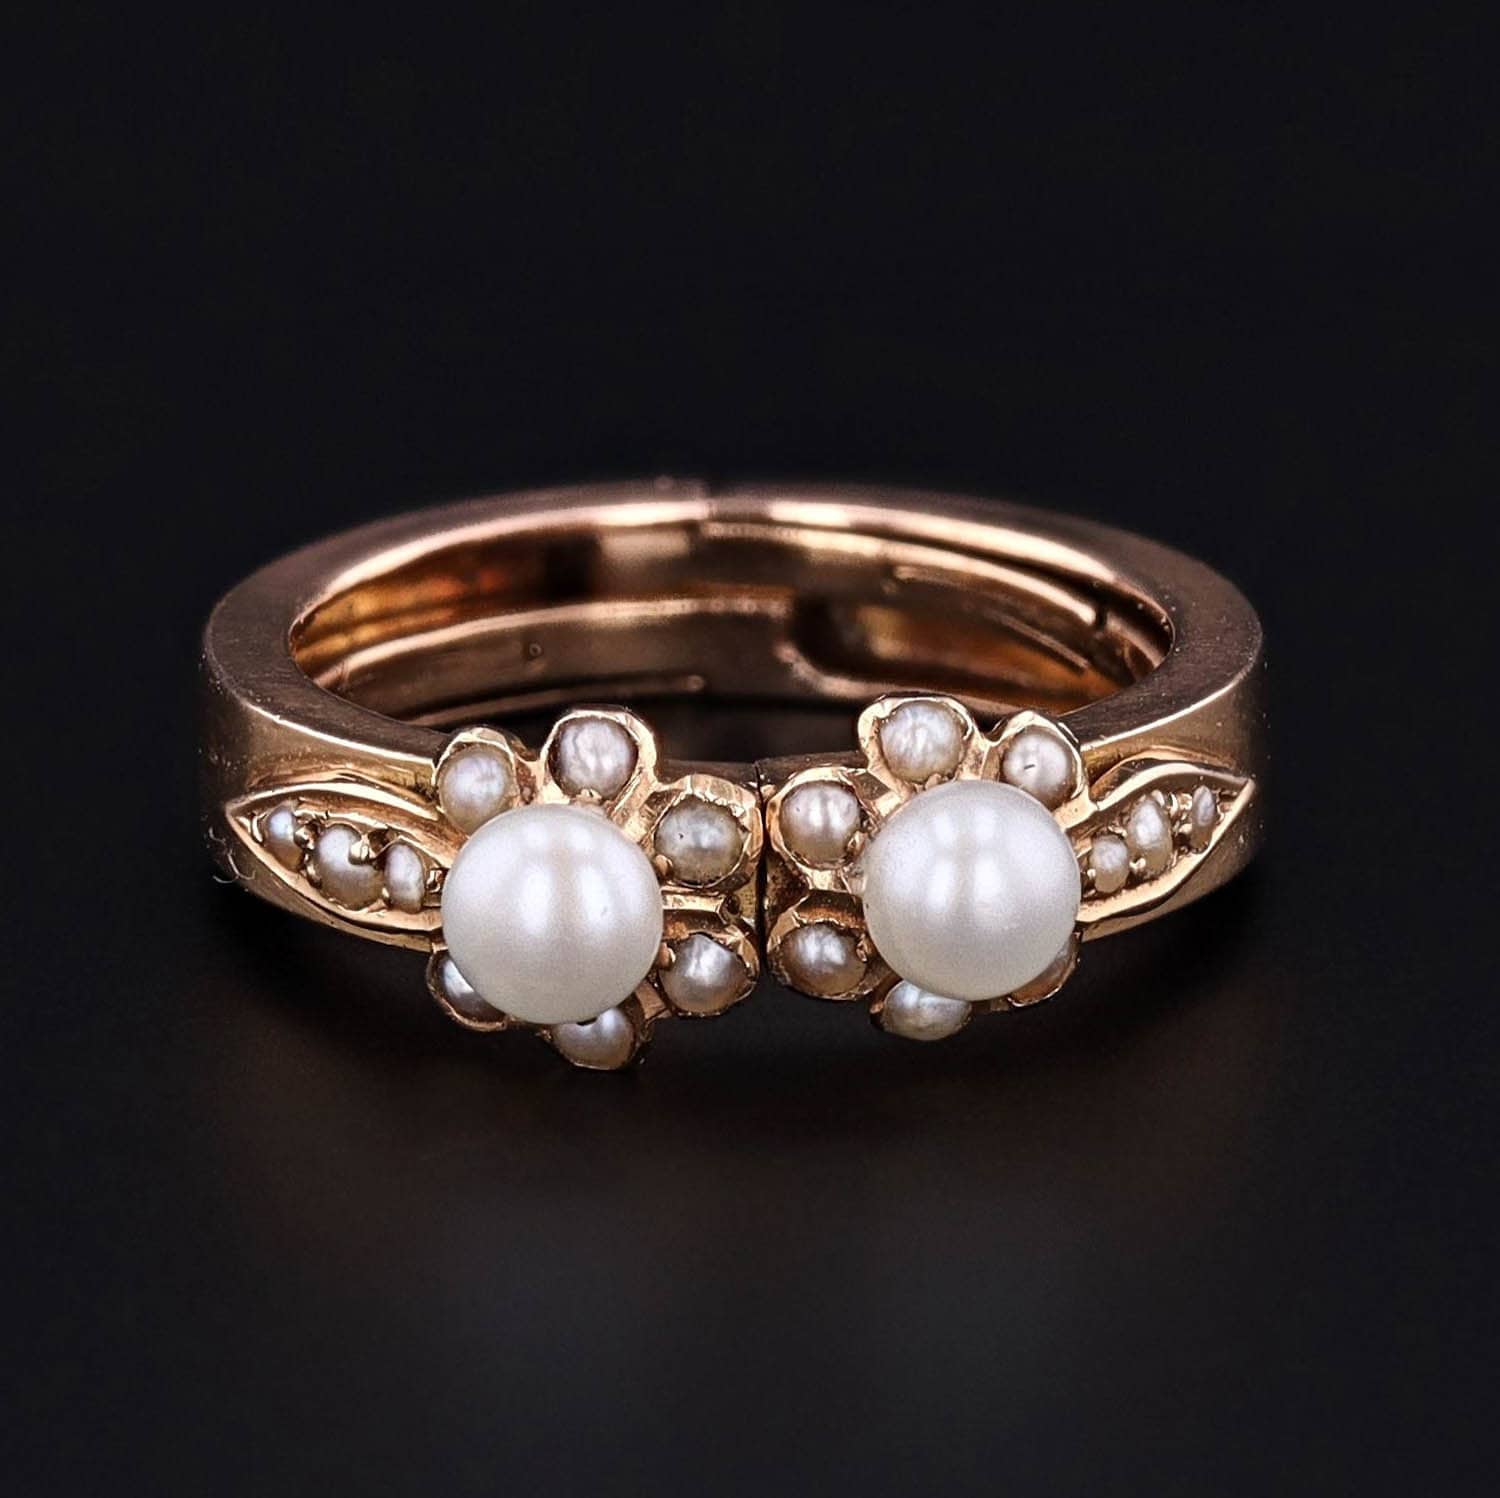 Antique Pearl Ring Convertible Into Earrings of 14k Gold